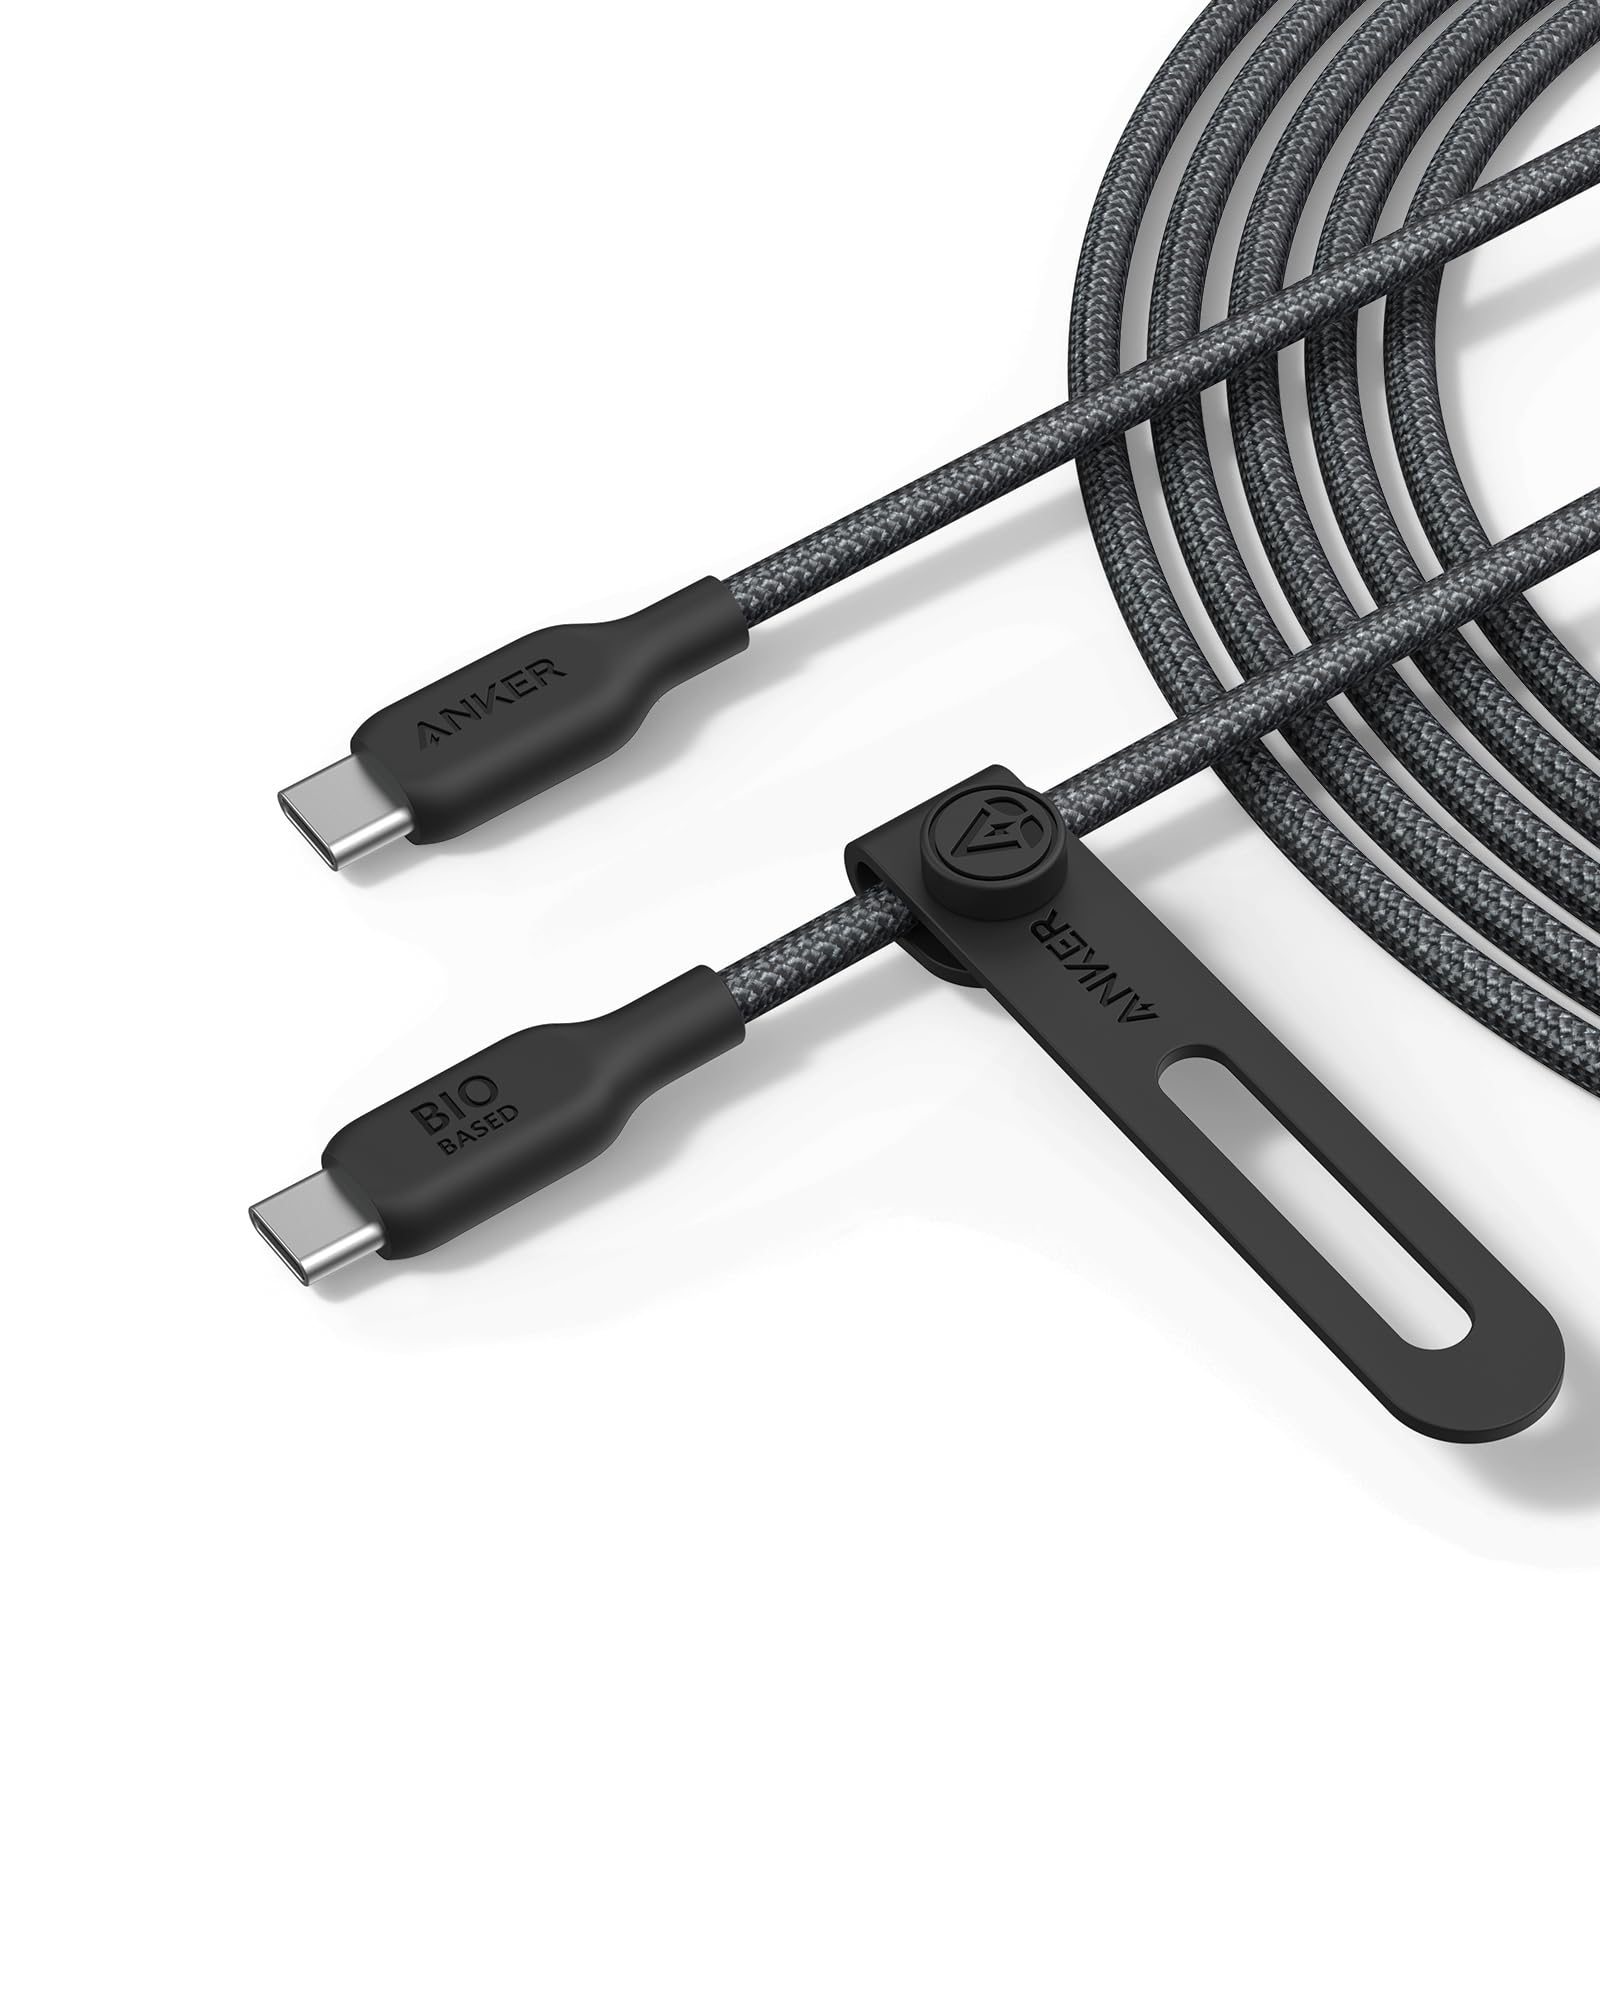 Anker Powerline III Flow, USB C to USB C Cable 100W 3ft, USB 2.0 Type C  Charging Cable Fast Charge for MacBook Pro 2020